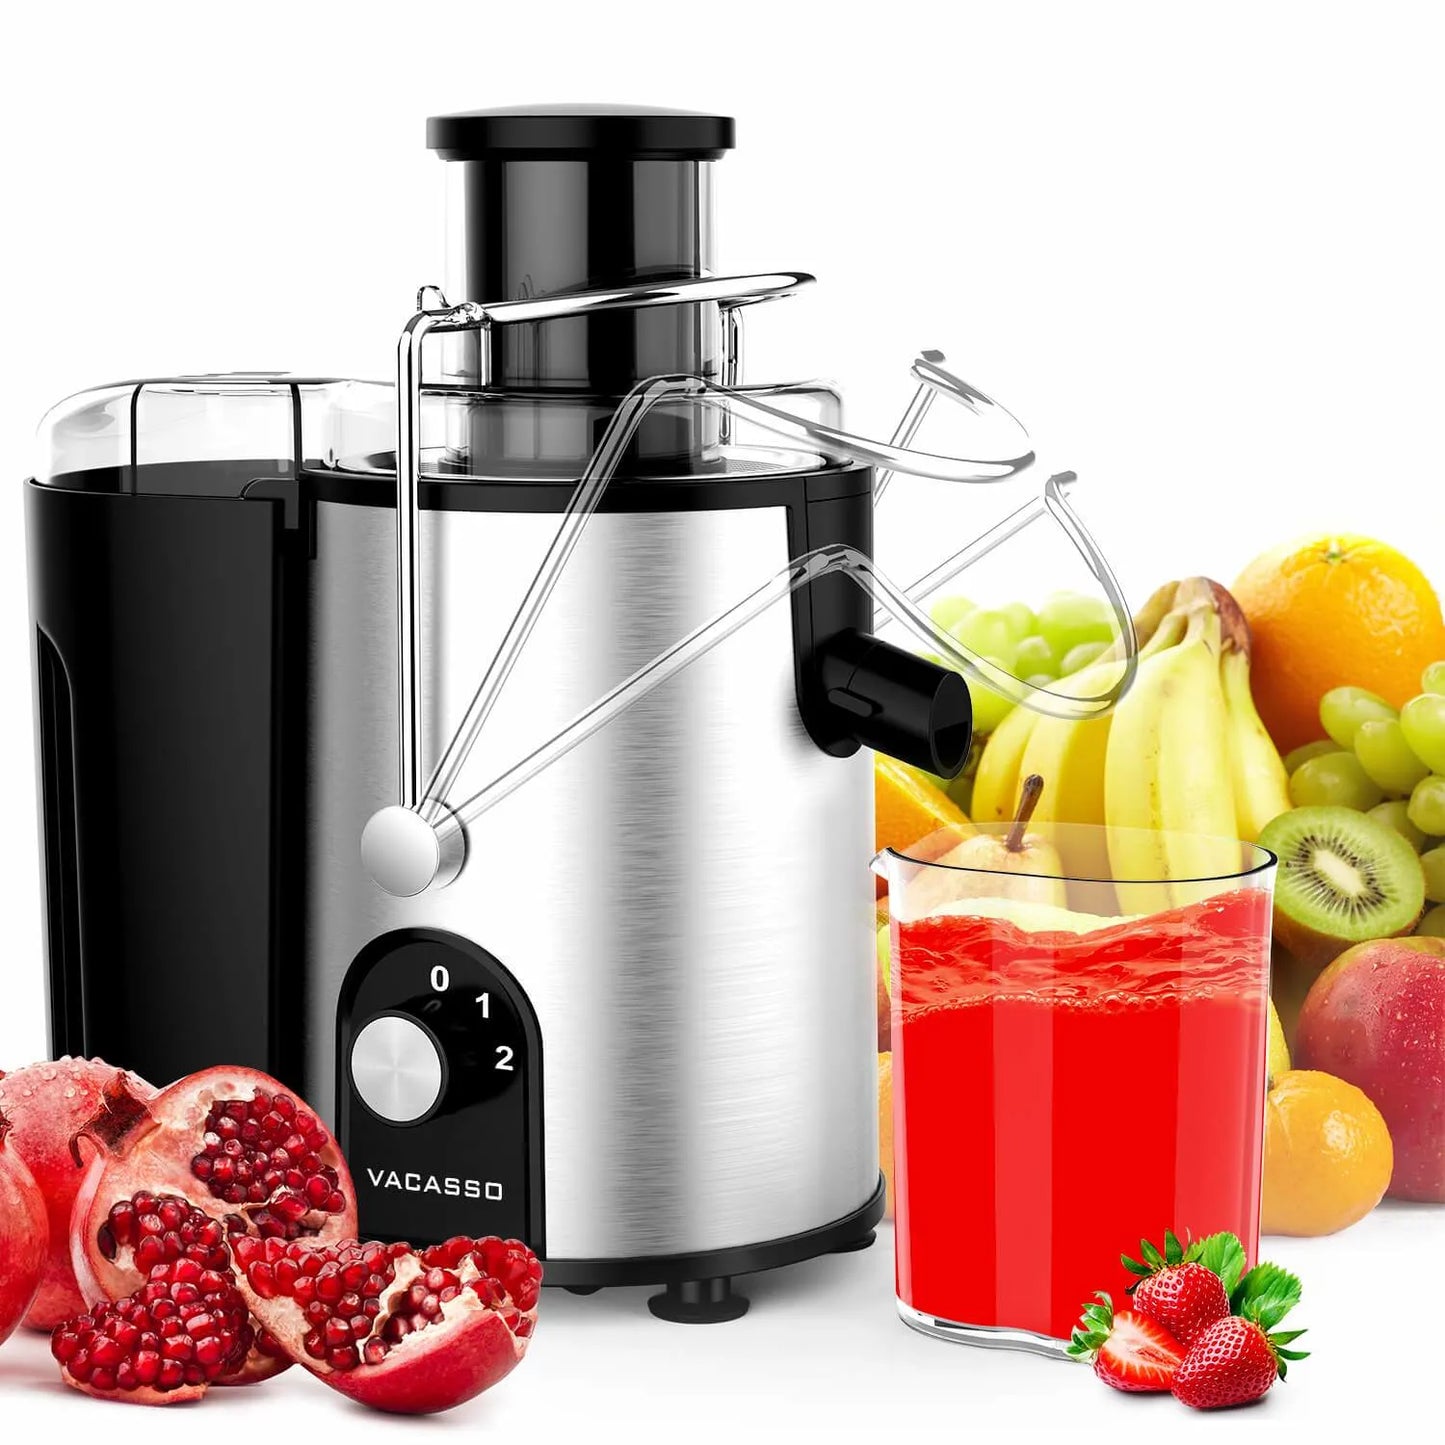 VACASSO Centrifugal Juicer Machines, Juice Extractor with Germany-Made 163 Chopping Blades (Titanium Reinforced) & 2-Layer Centrifugal Bowl